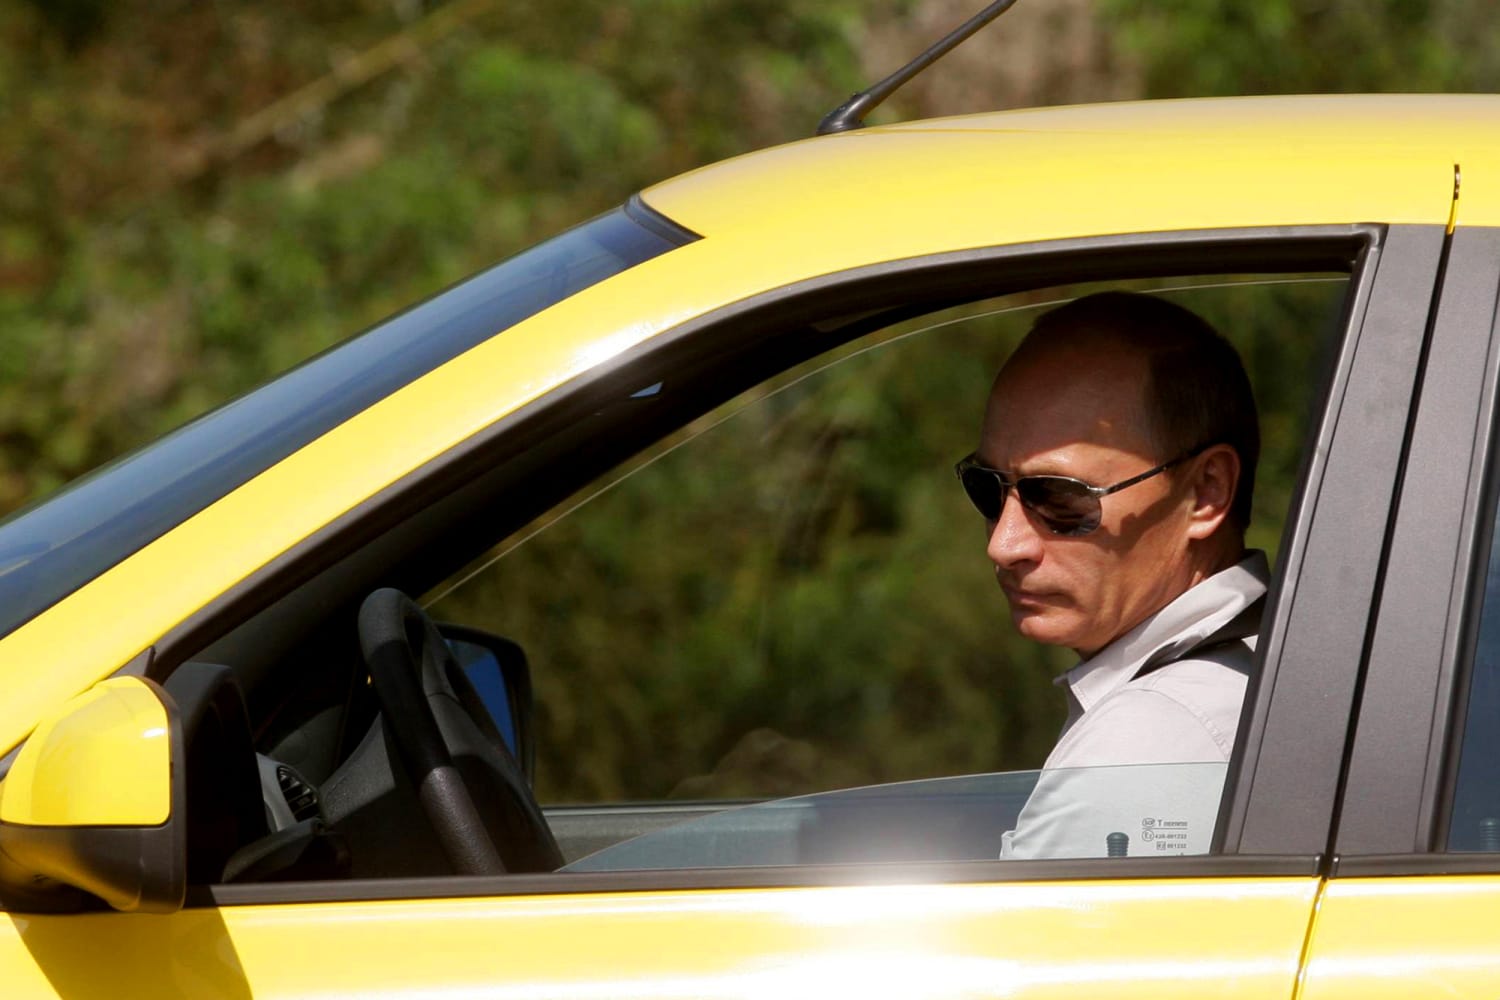 Putin laments Soviet collapse, says he moonlighted as taxi driver to earn money